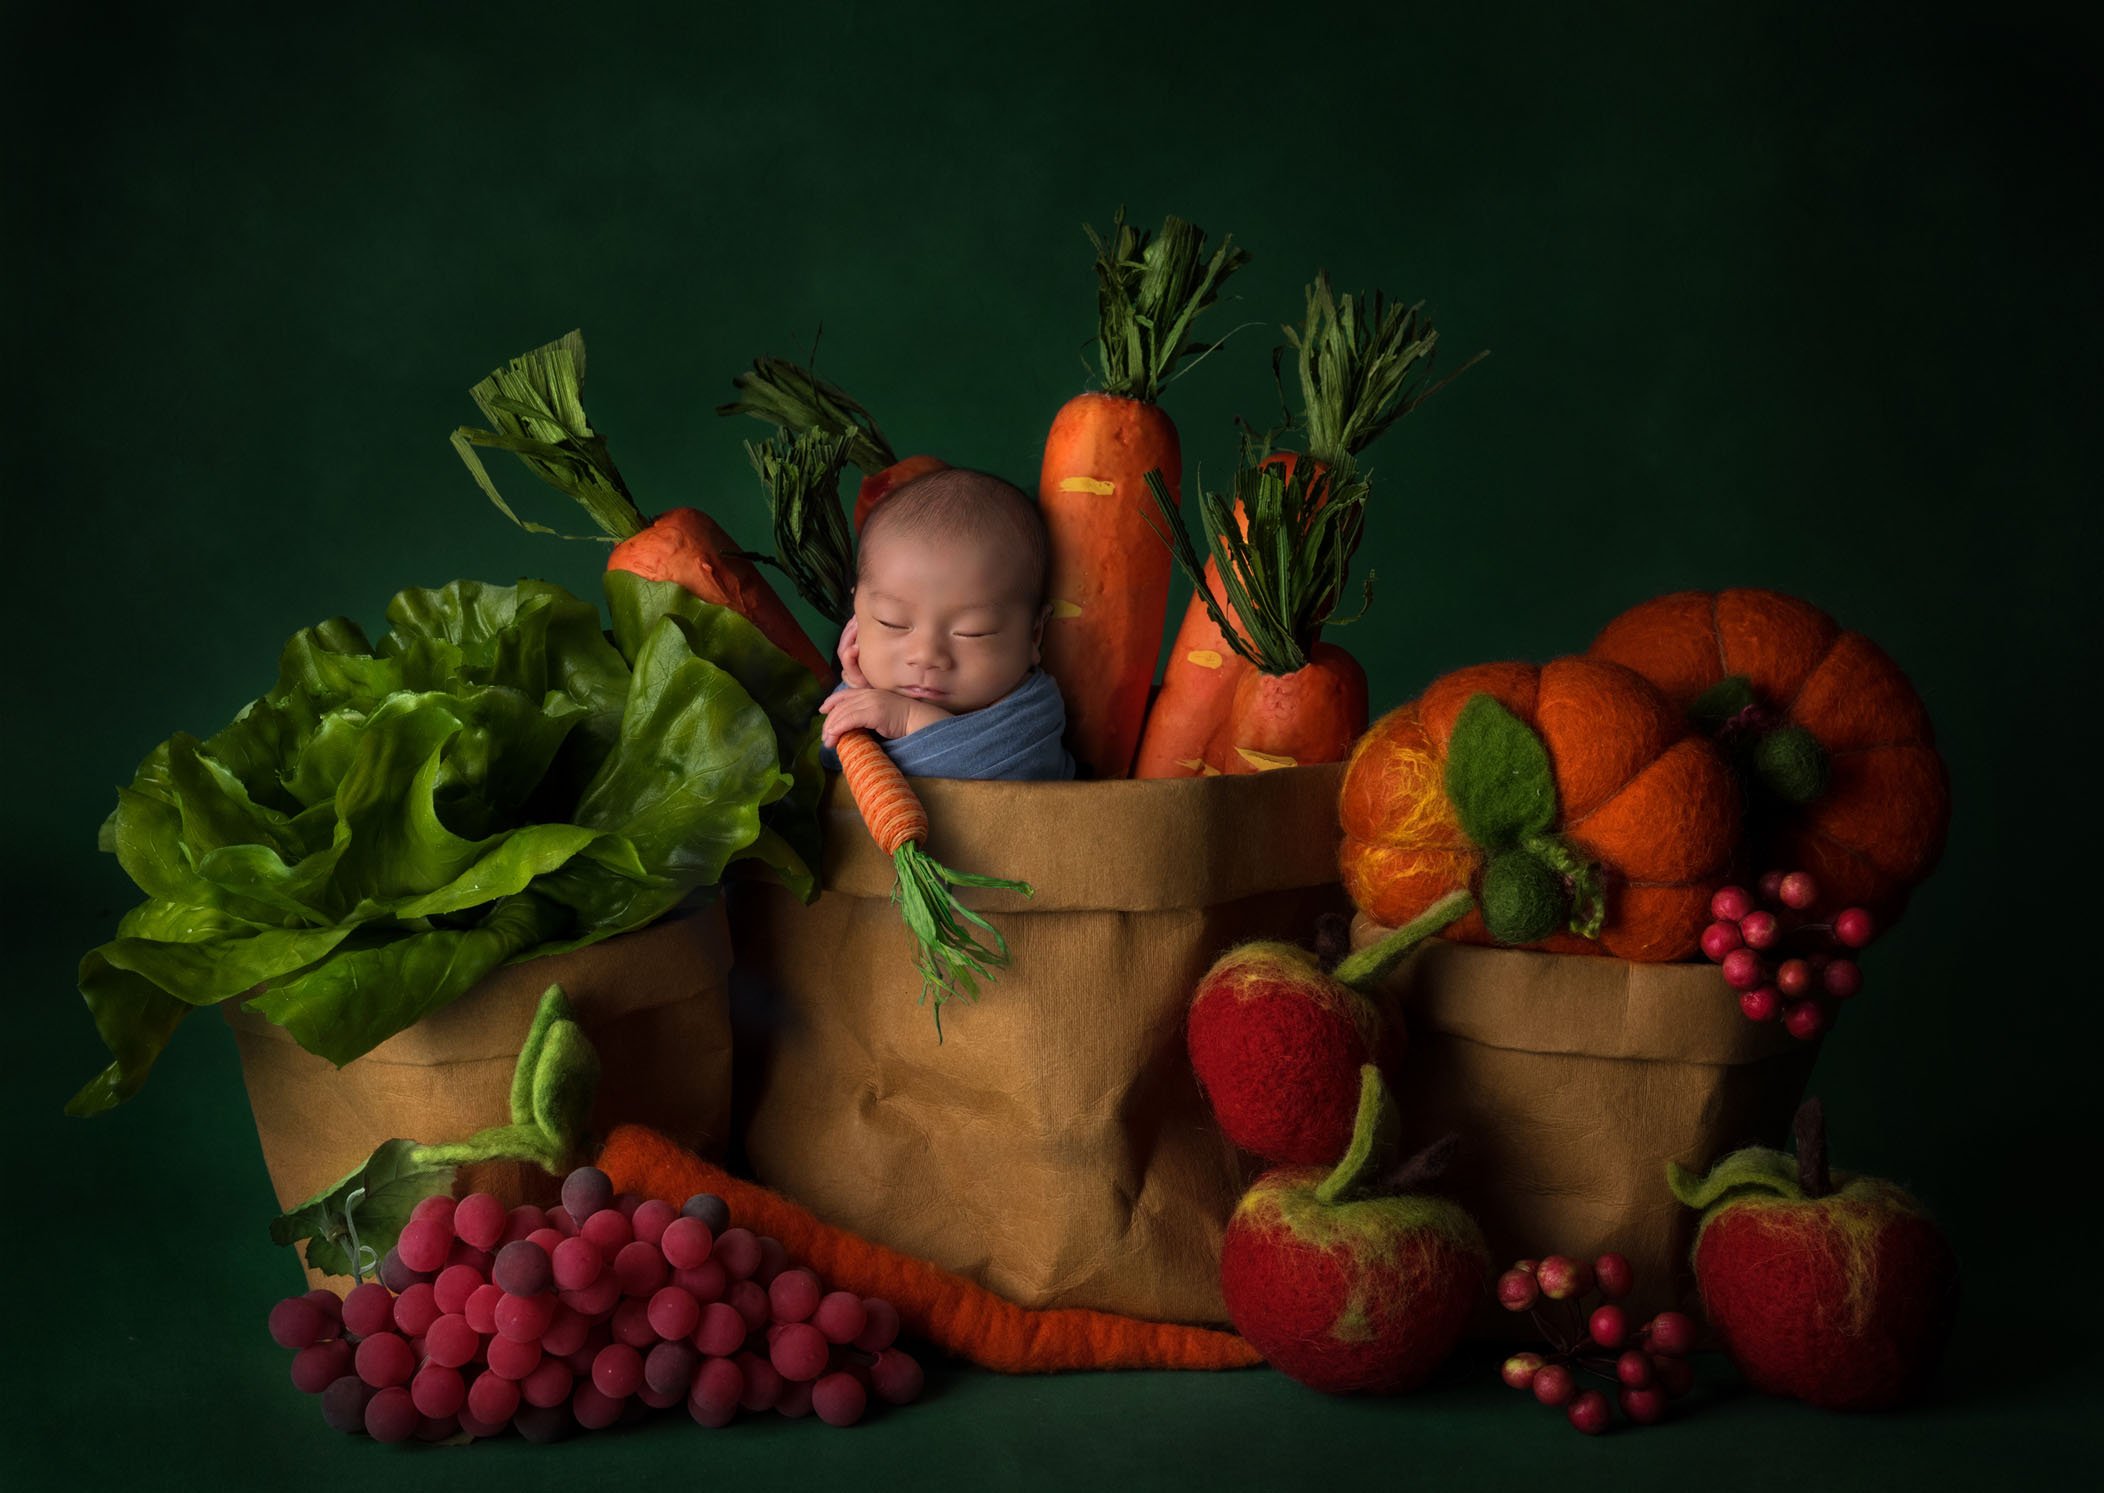 creative newborn photos newborn baby sleeping in grocery bag filled with felted vegetables